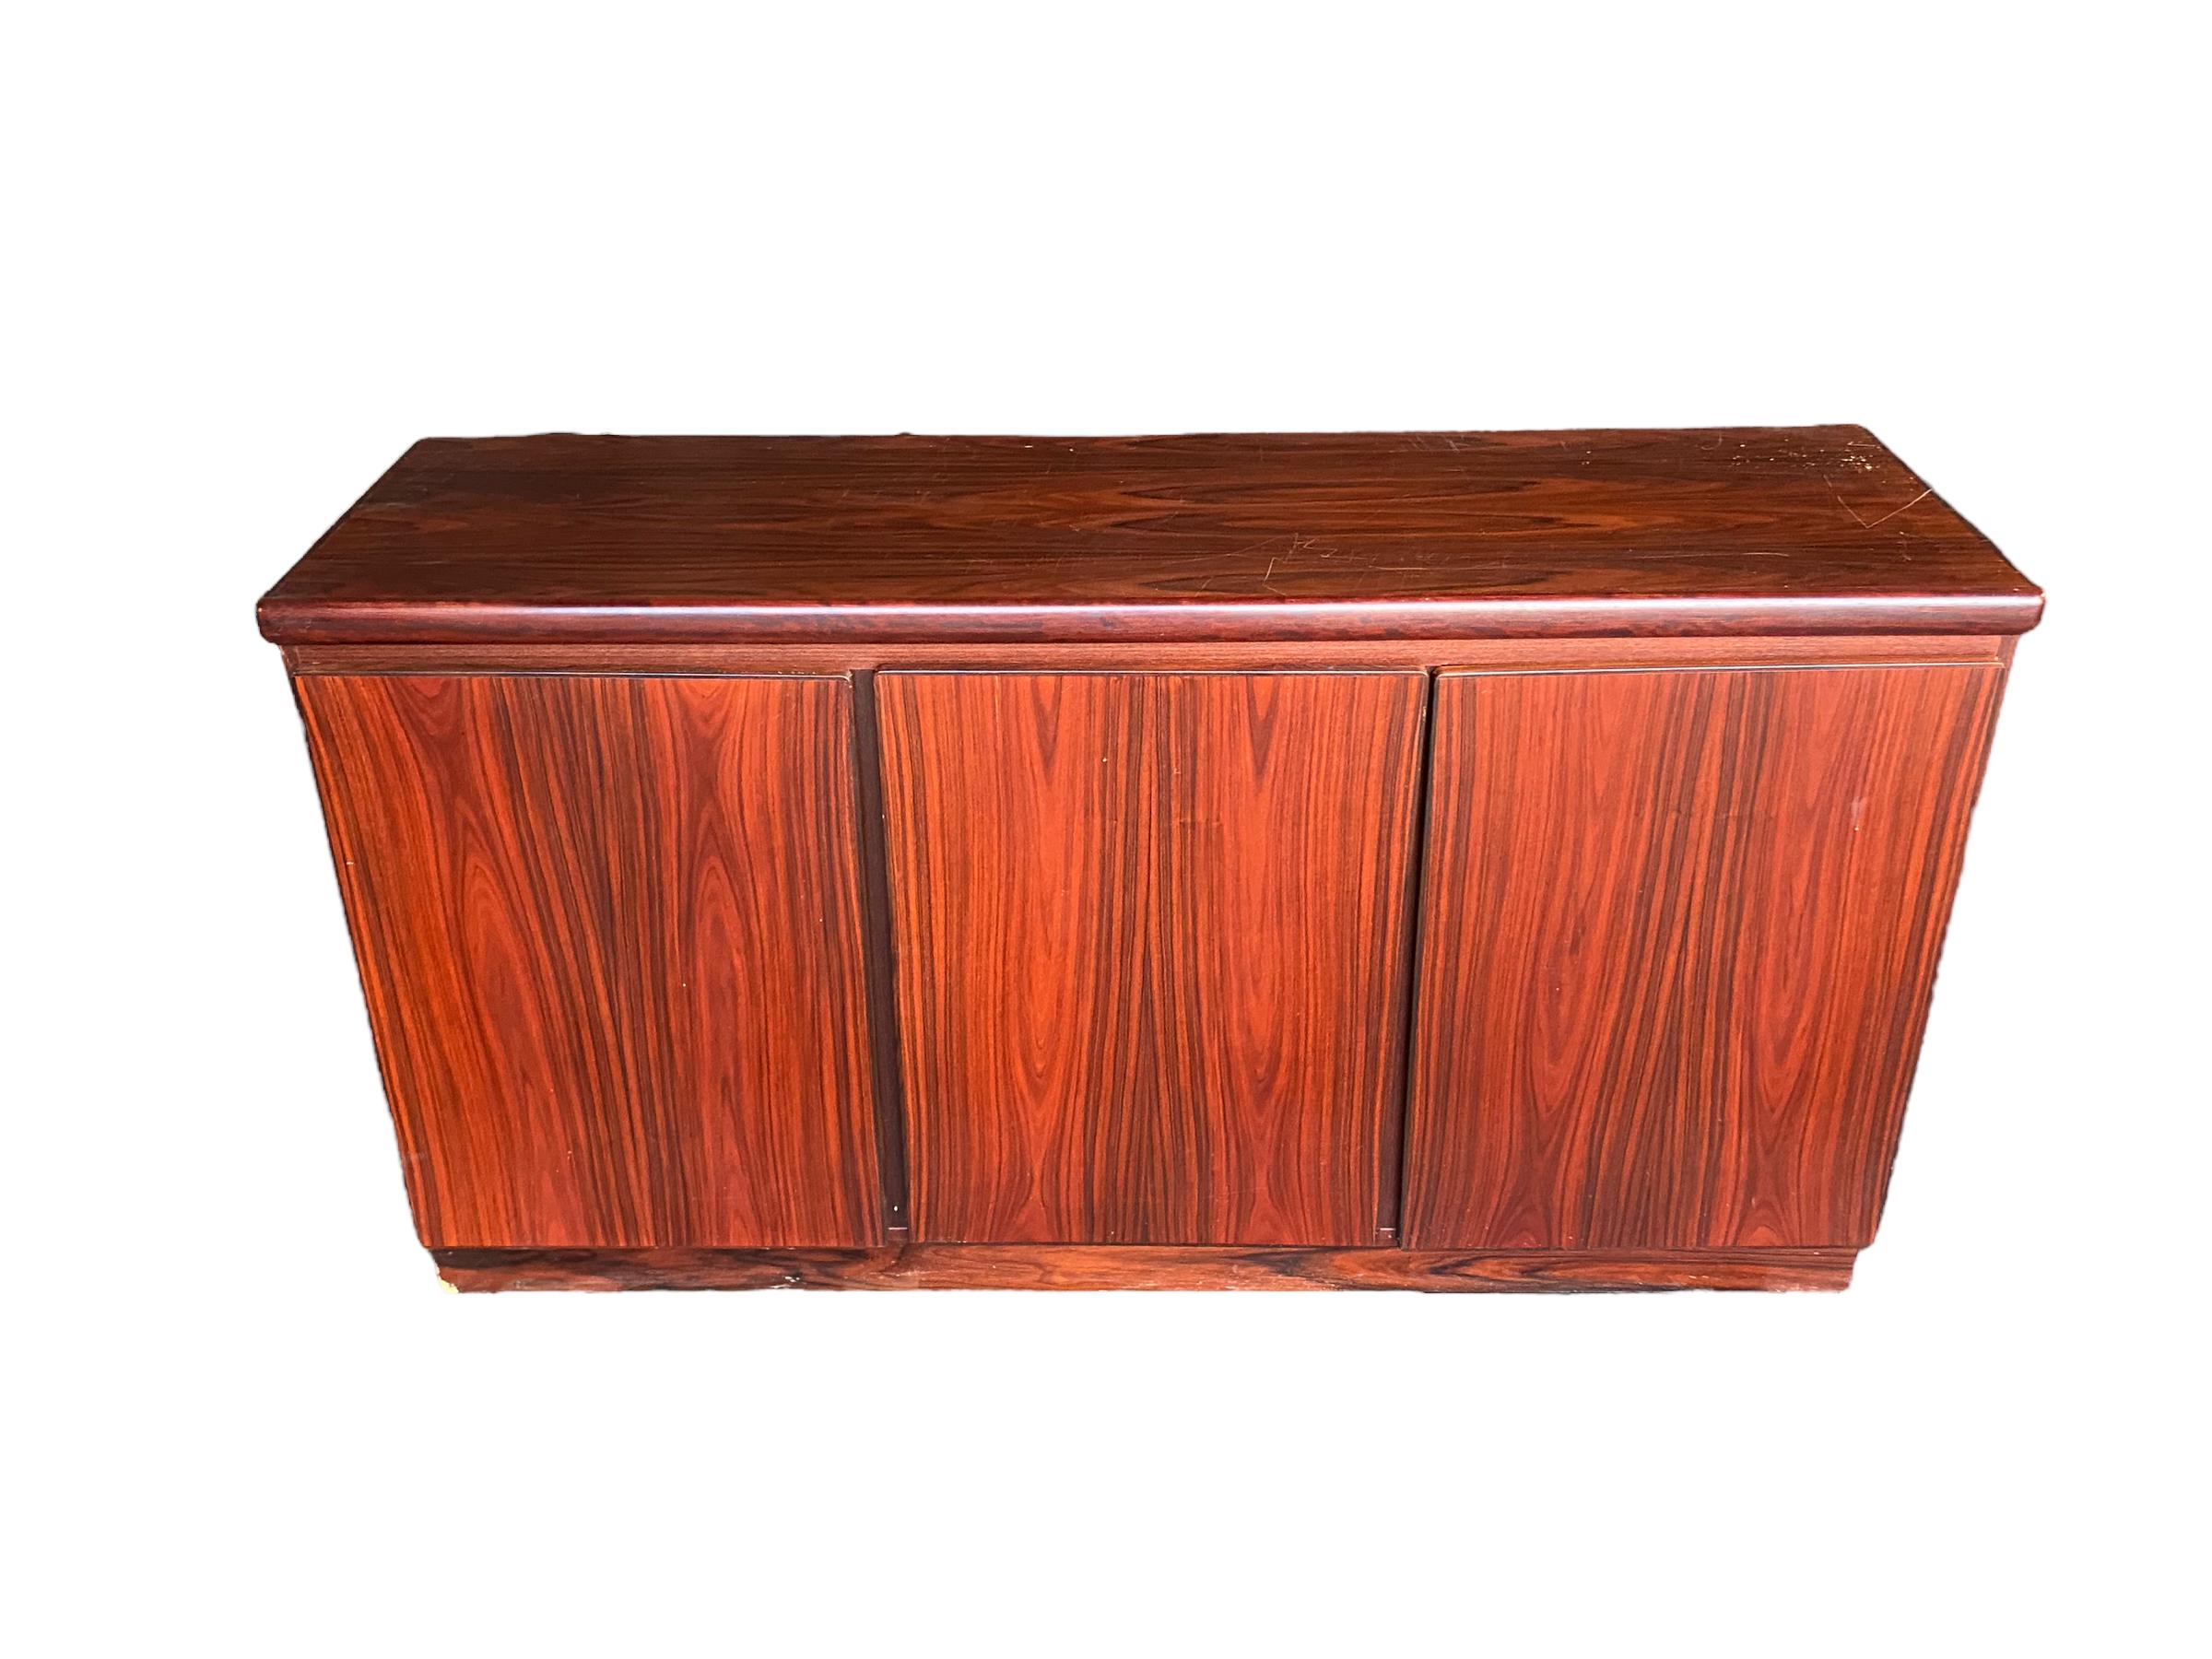 Danish modern credenza sideboard in rosewood. Manufactured by Rasmus Furniture, this piece has three storage compartments, two connecting with shelves and one separate door with drawers. Elegant, simple design with stunning rosewood grain. 